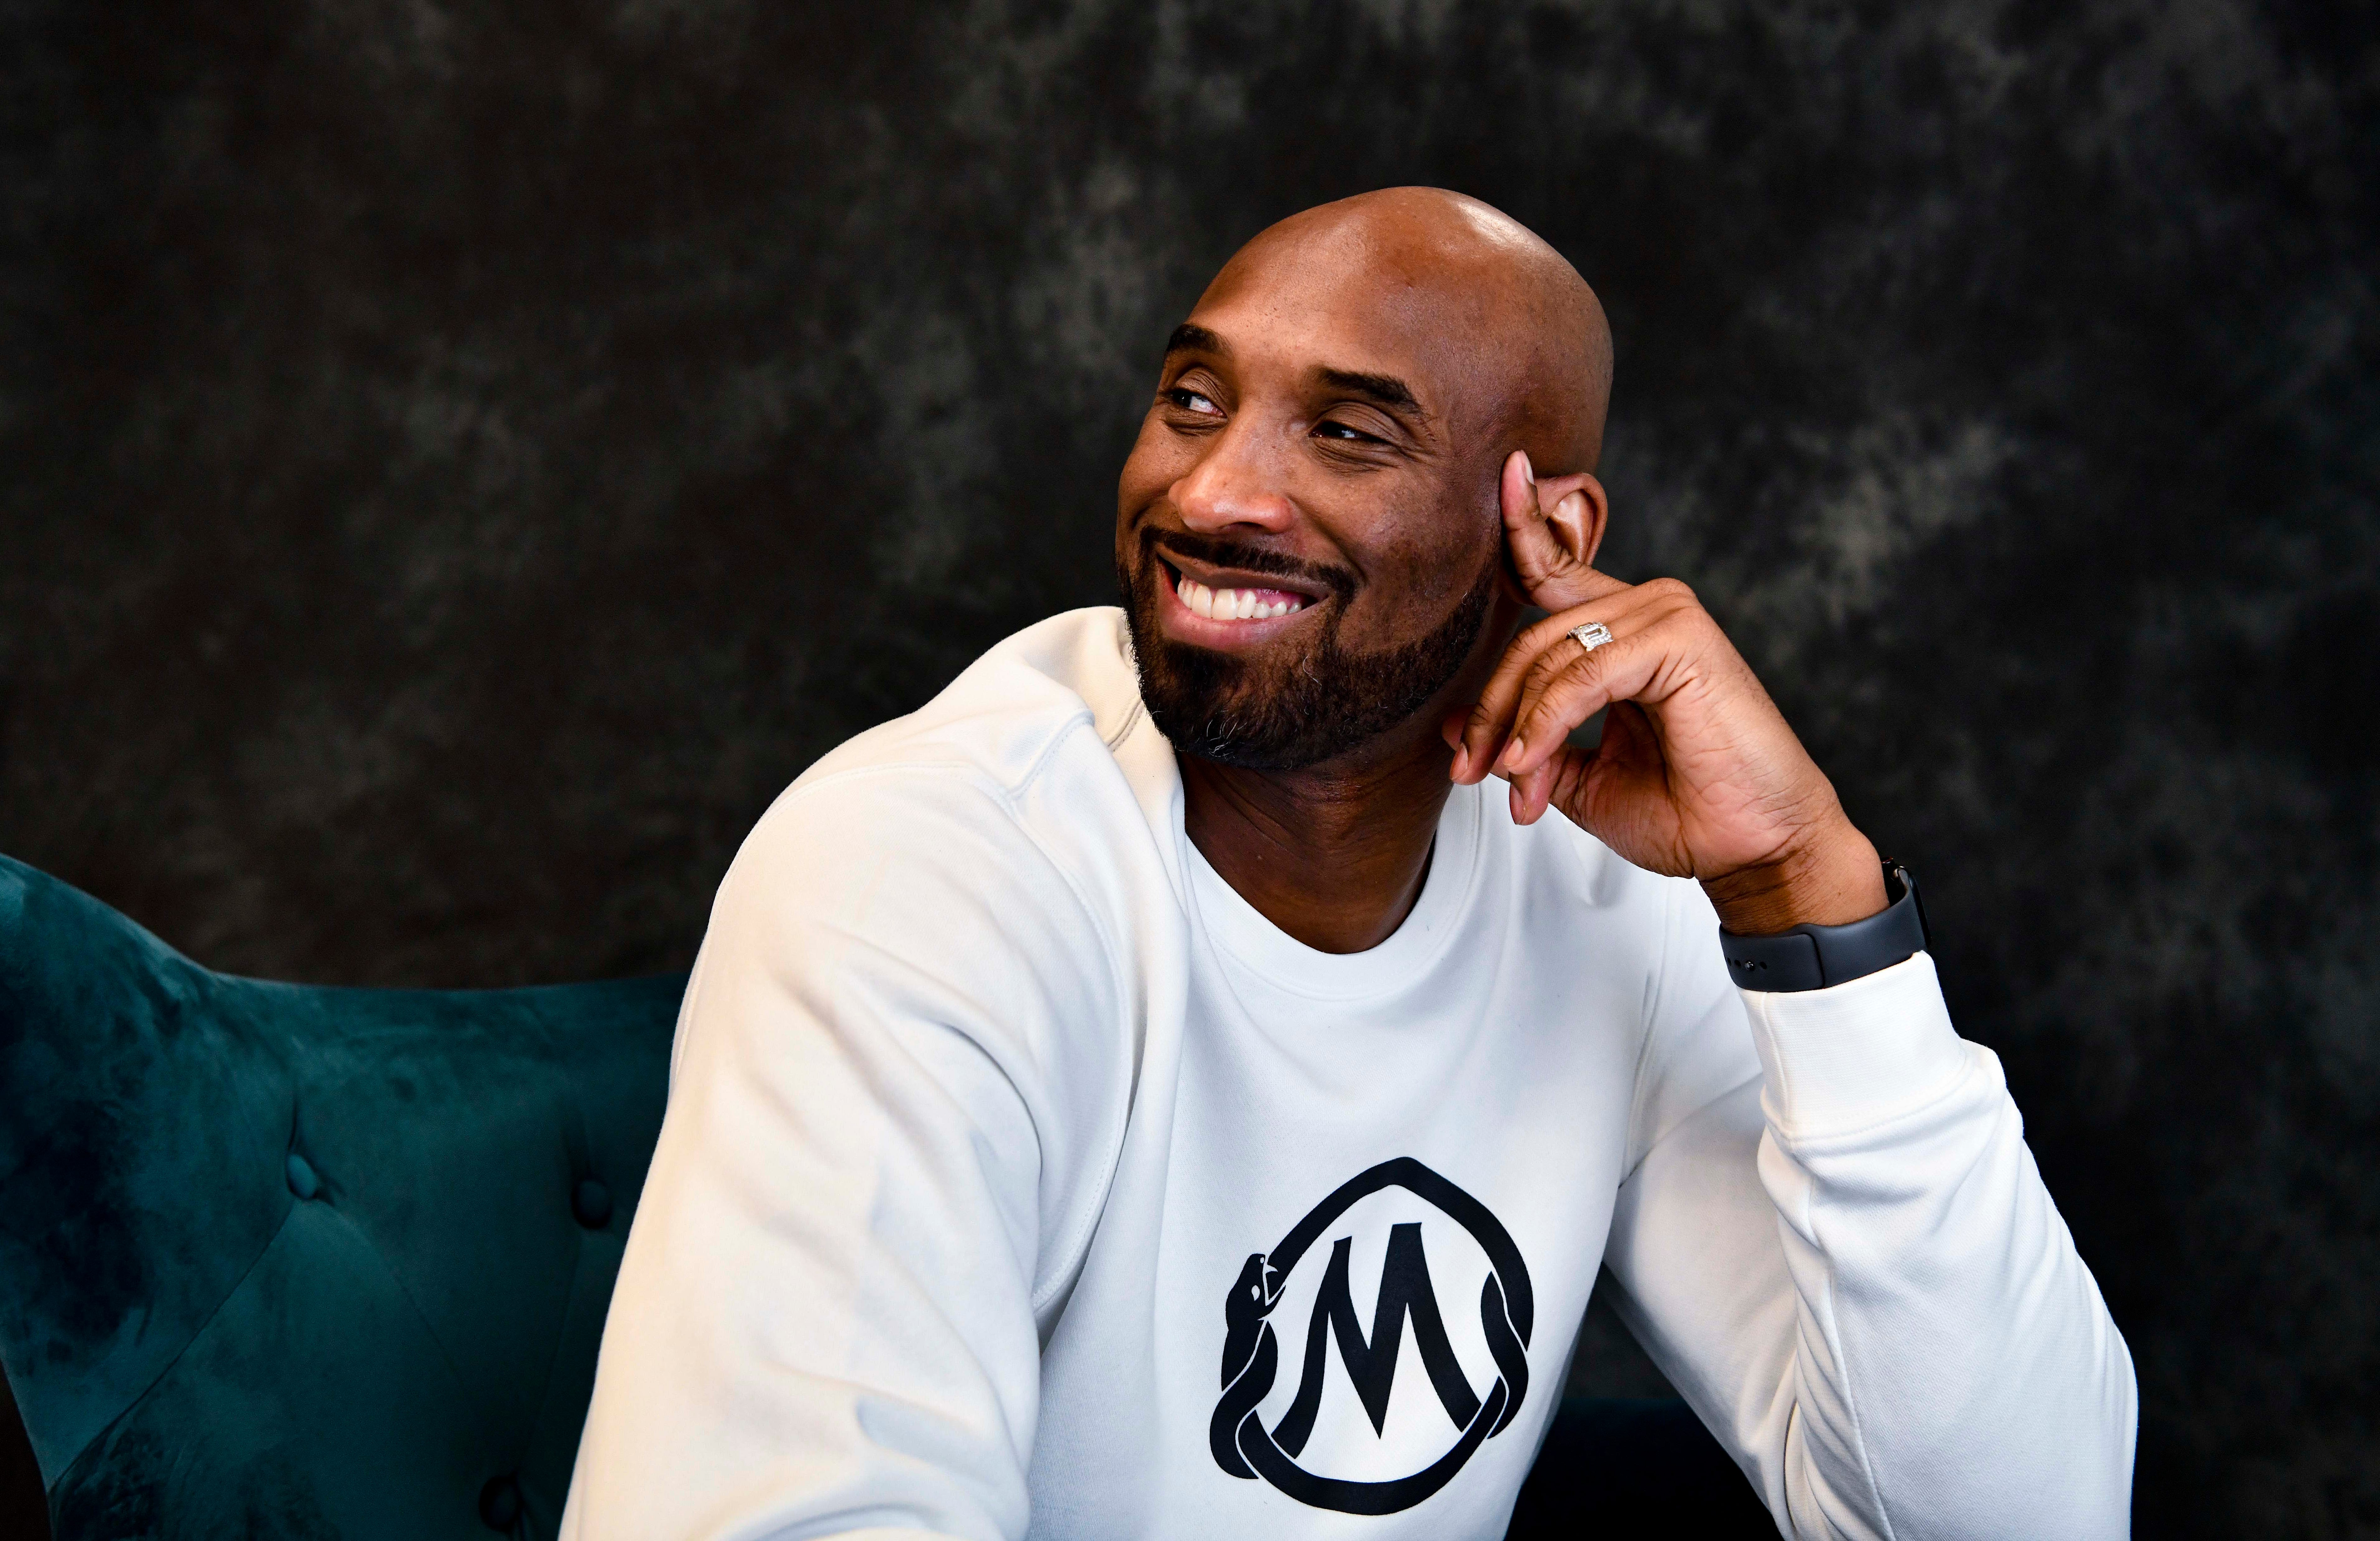 Kobe Bryant posed for a portrait inside of his office in Costa Mesa, Calif., on Jan. 17, 2020. Bryant, one of the greatest NBA players in history, was building an impressive resume in his post-basketball career, including winning an Academy Award.